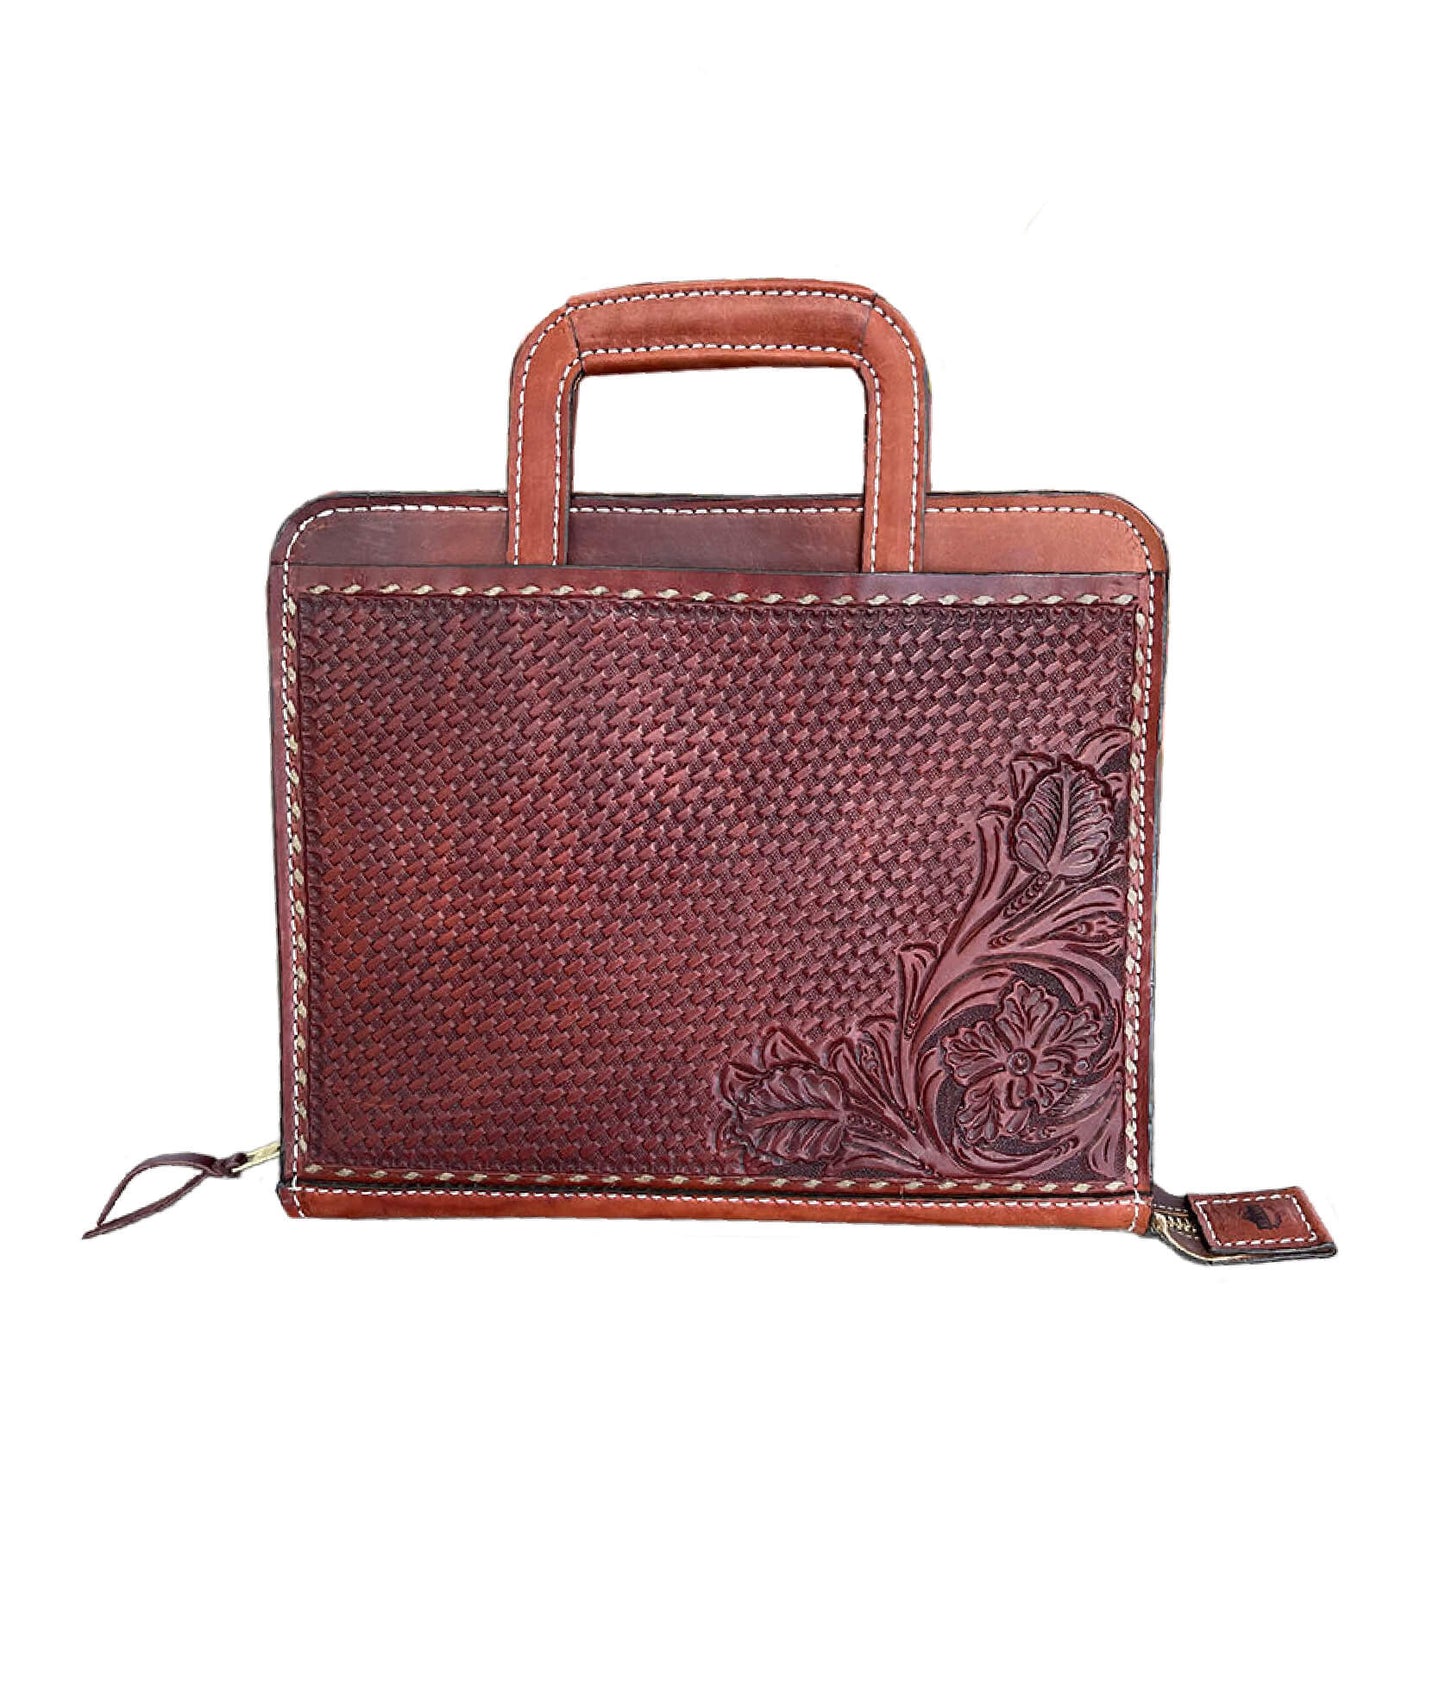 Cowboy Briefcase toast leather basket and wild rose tooling with buckstitch